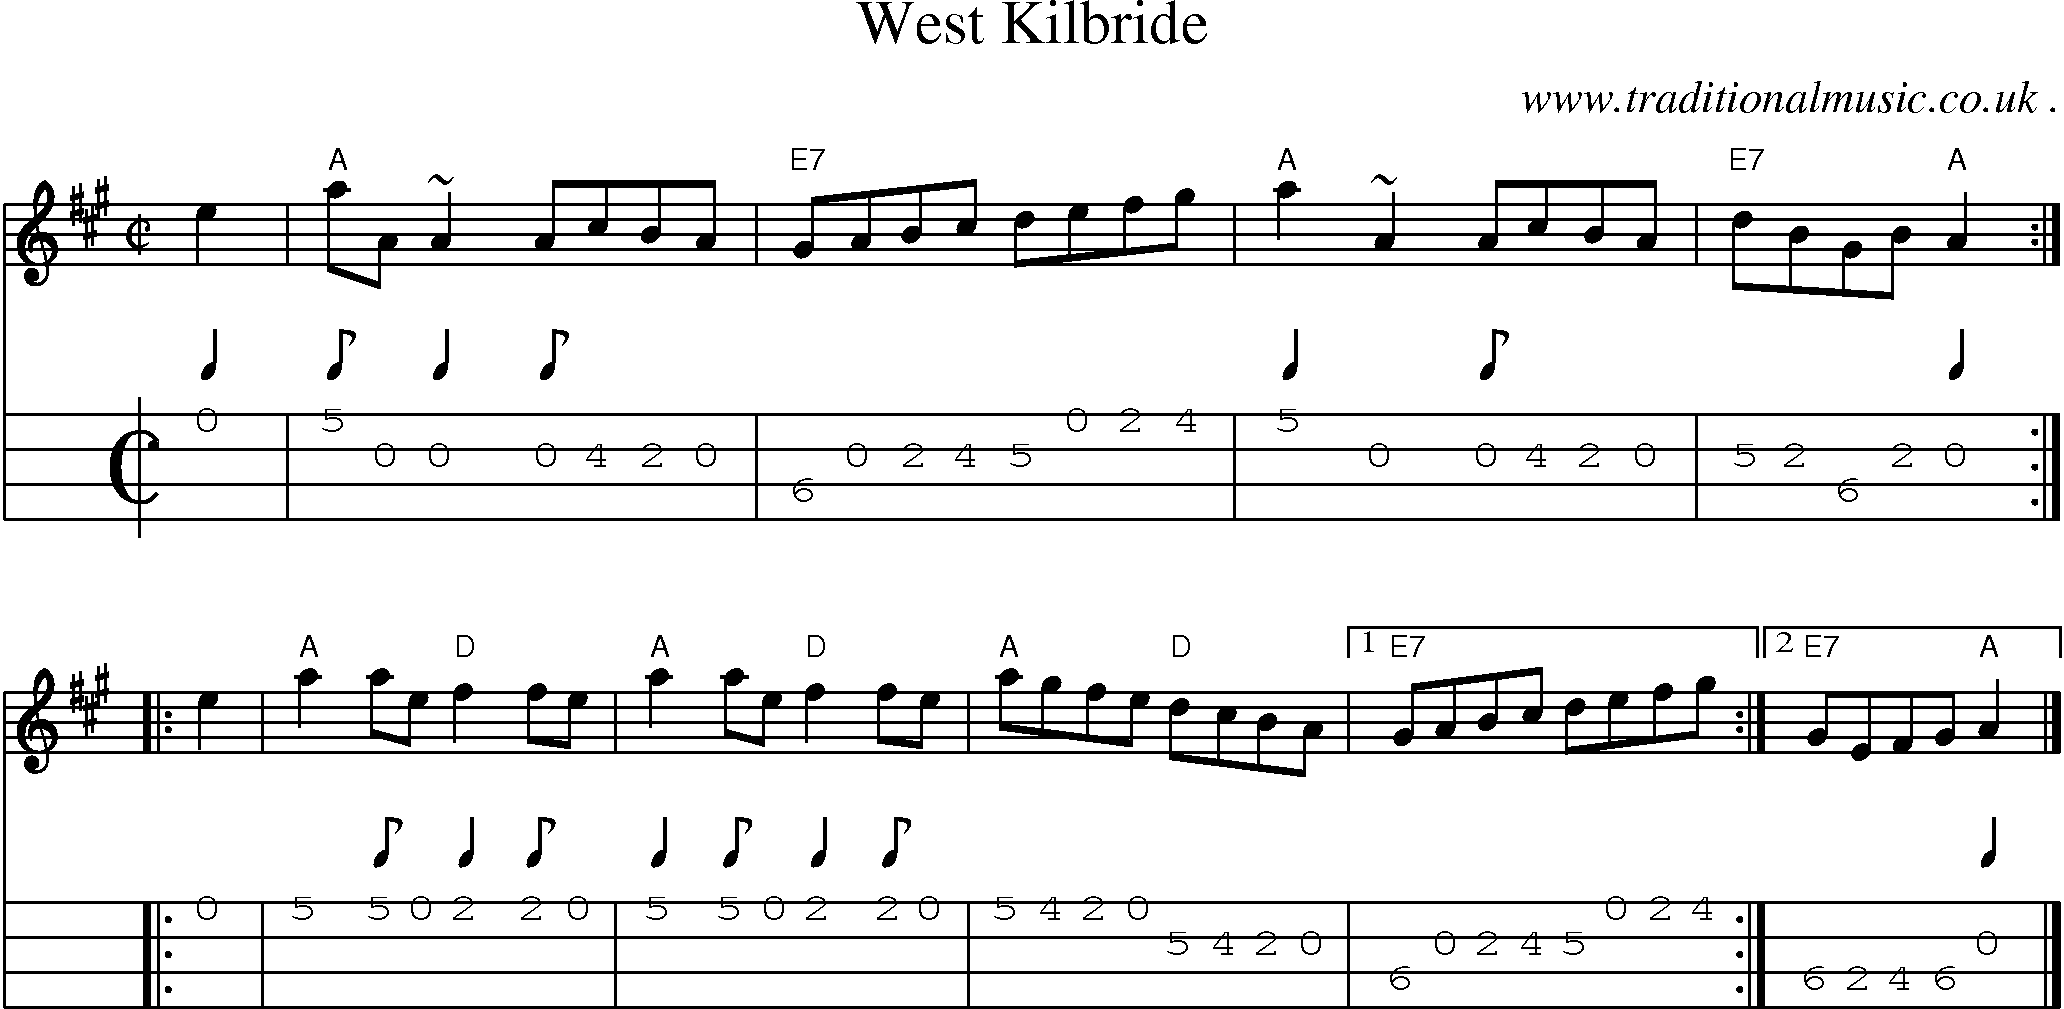 Sheet-music  score, Chords and Mandolin Tabs for West Kilbride